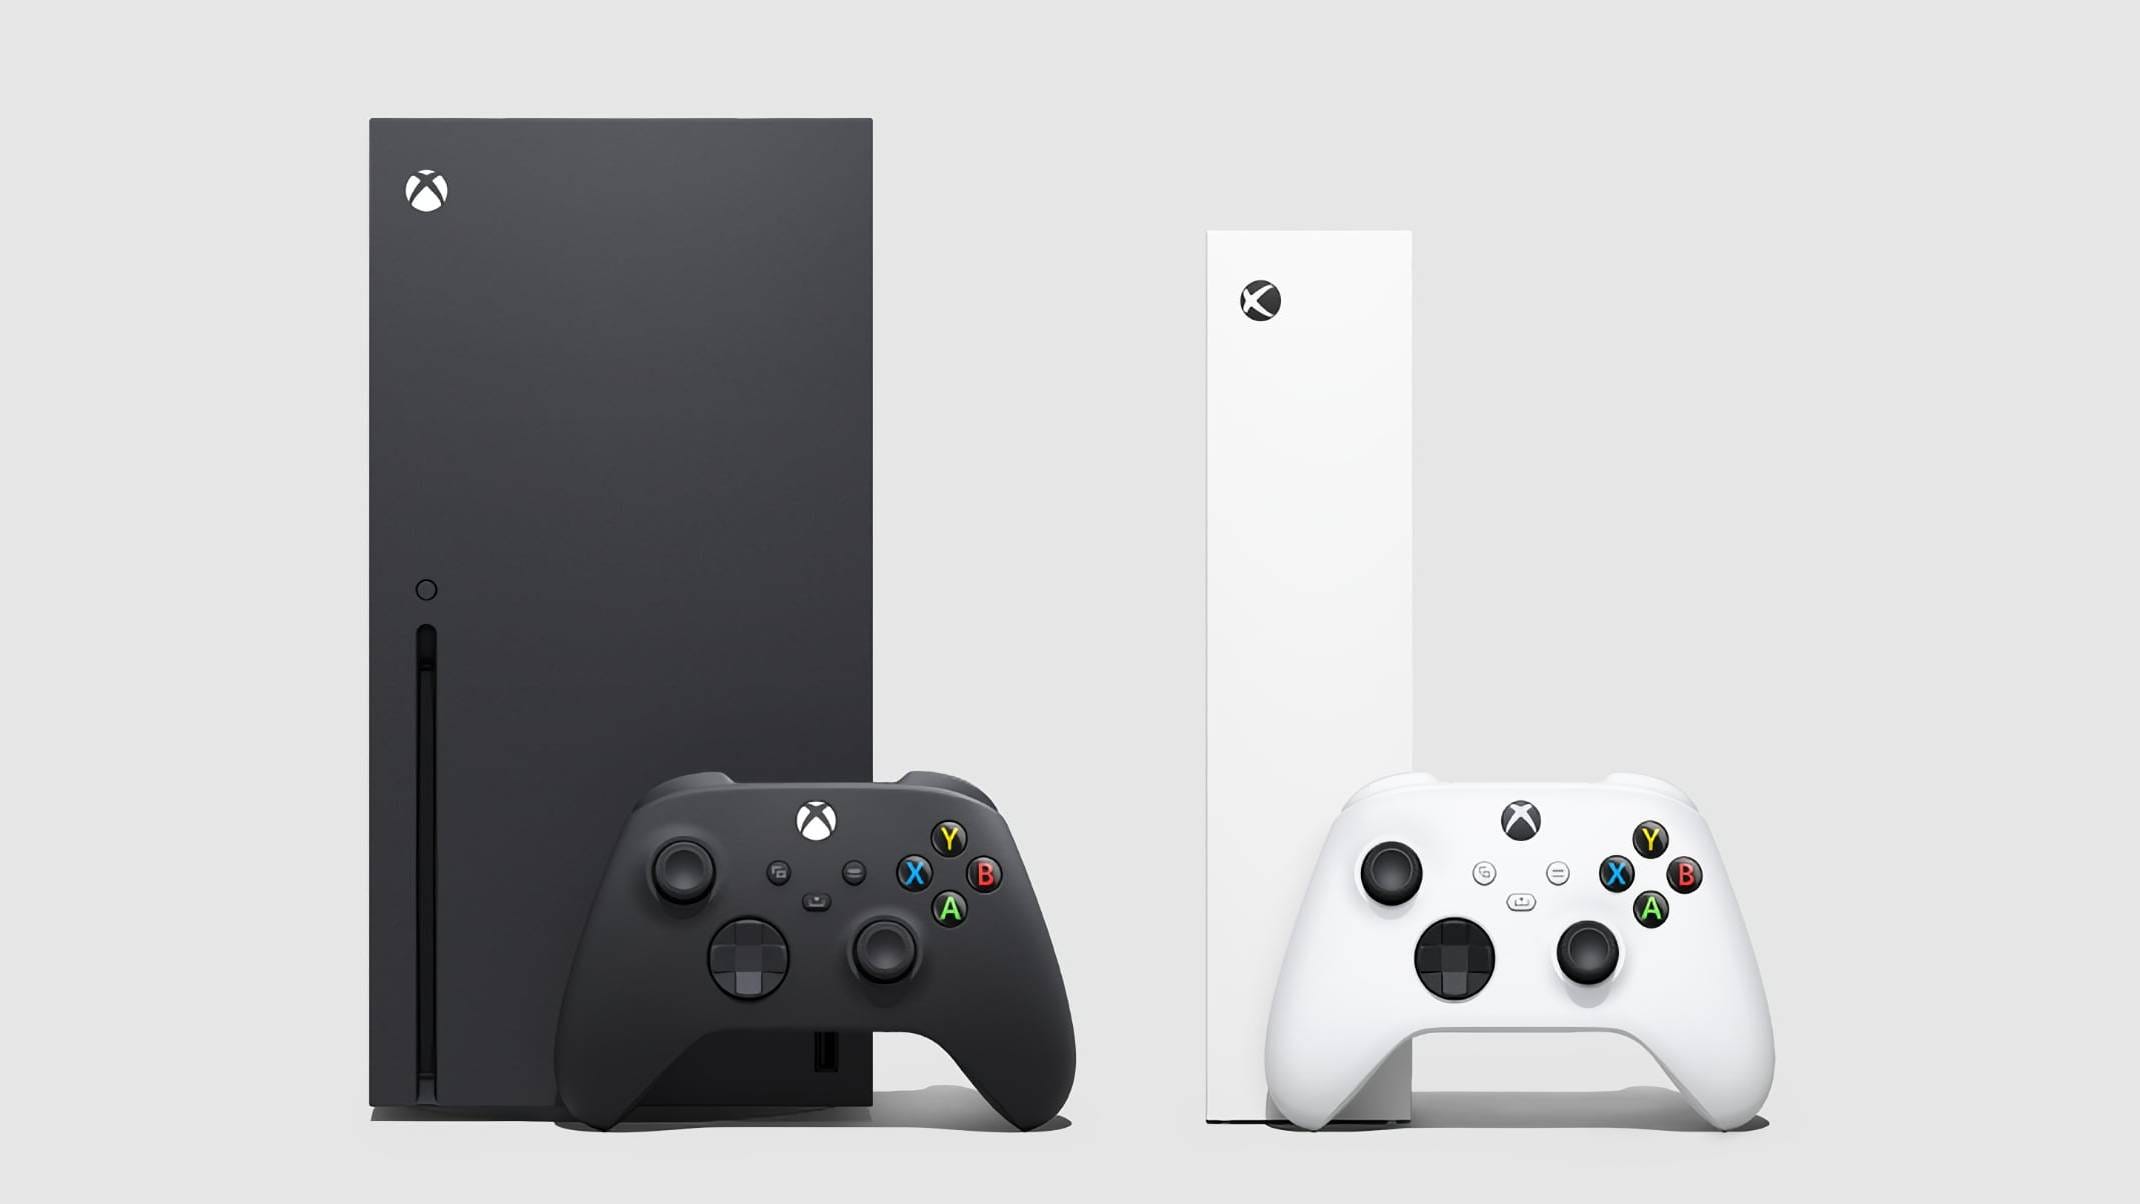 What Would Convince You To Use Xbox Cloud Gaming More Often